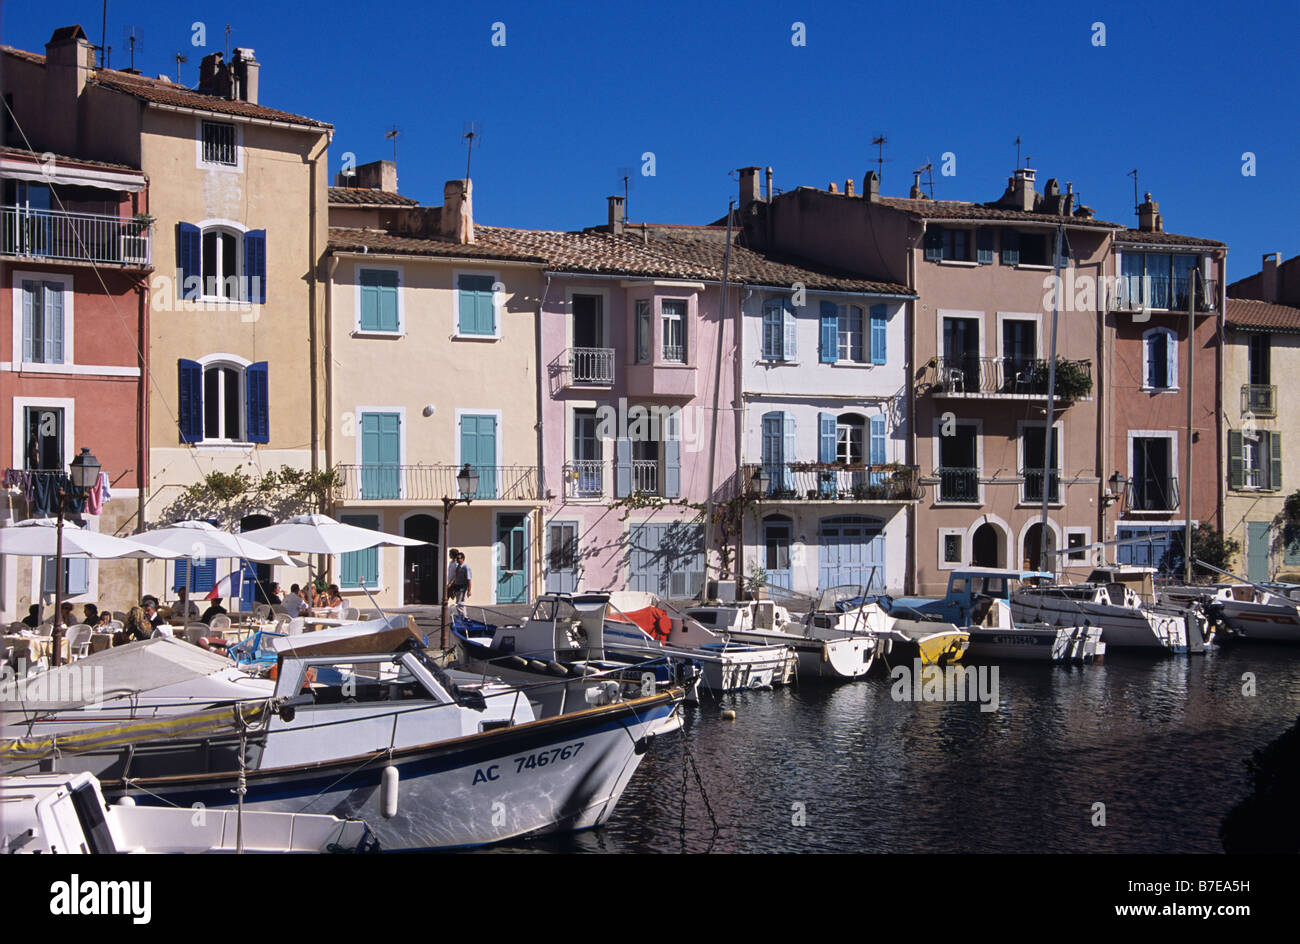 Canalside Houses and Pavement Cafe Restaurant on Brescon Quay, Martigues, the 'Venice of Provence', Provence, France Stock Photo